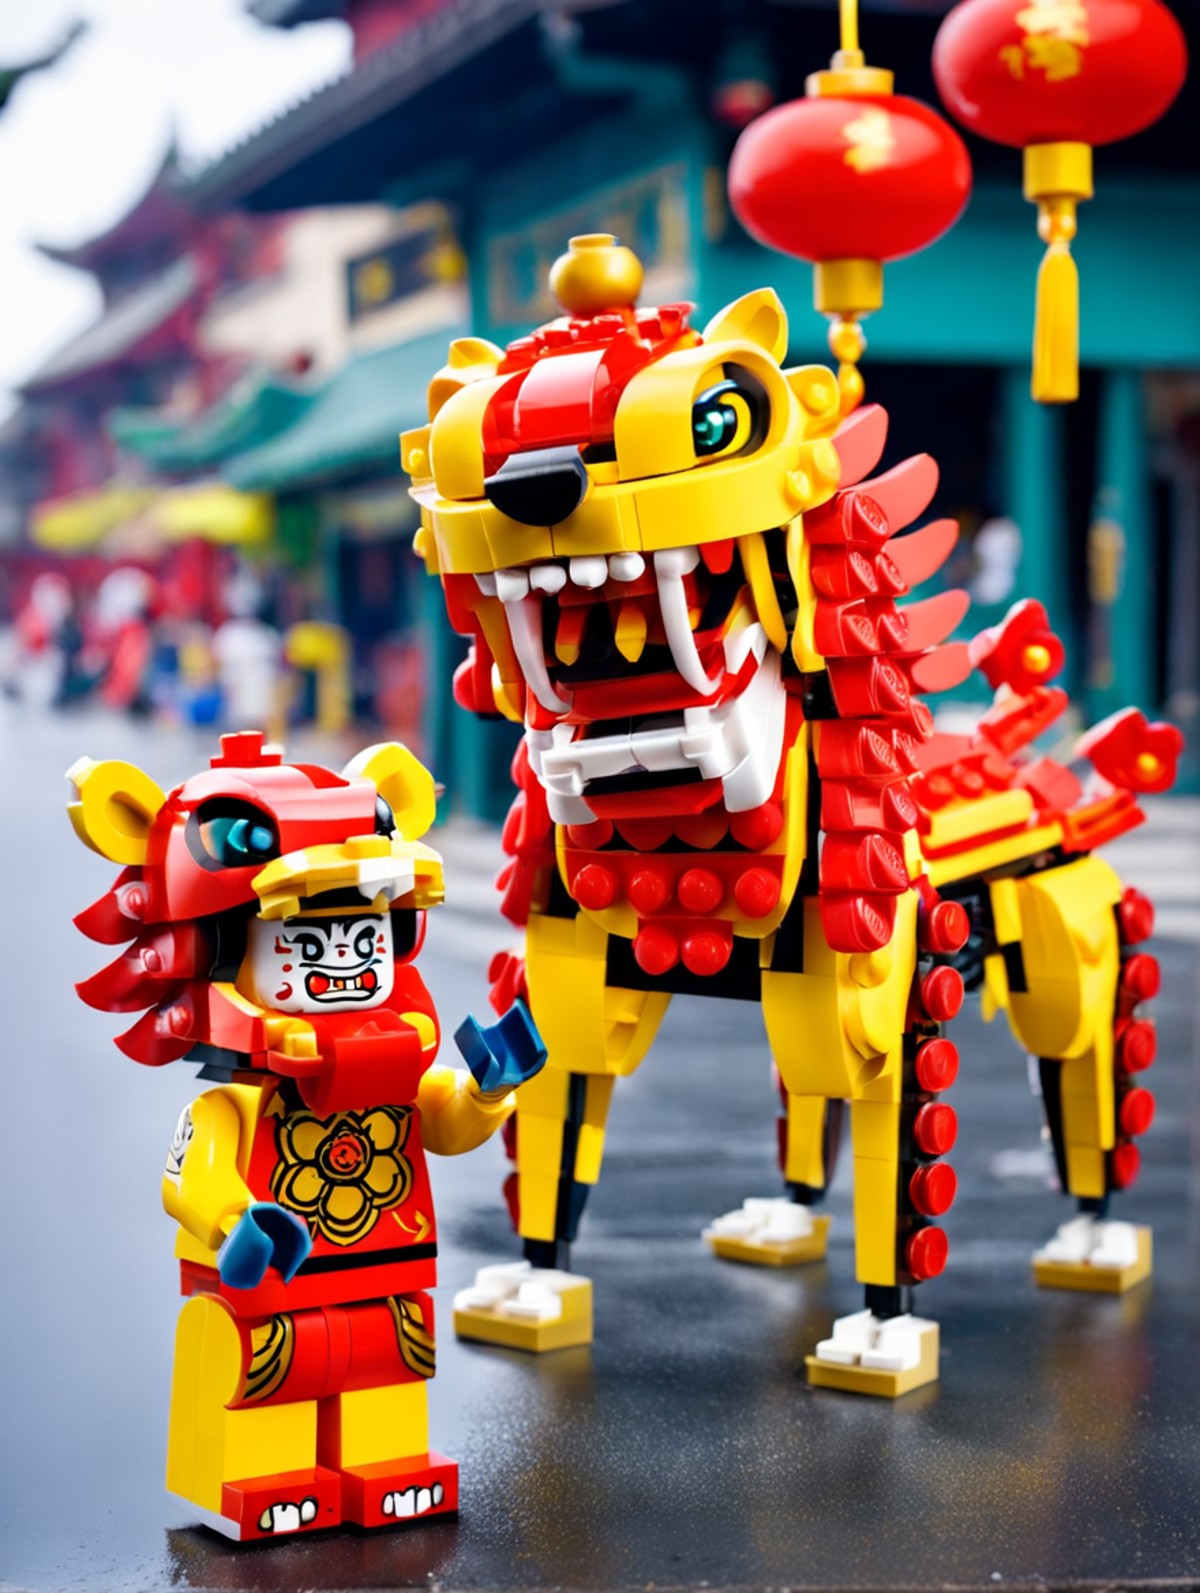 <lora:Lego_XL_v2.1:0.8> LEGO Creator,
Chinese traditional lion dance, on the street in the early morning